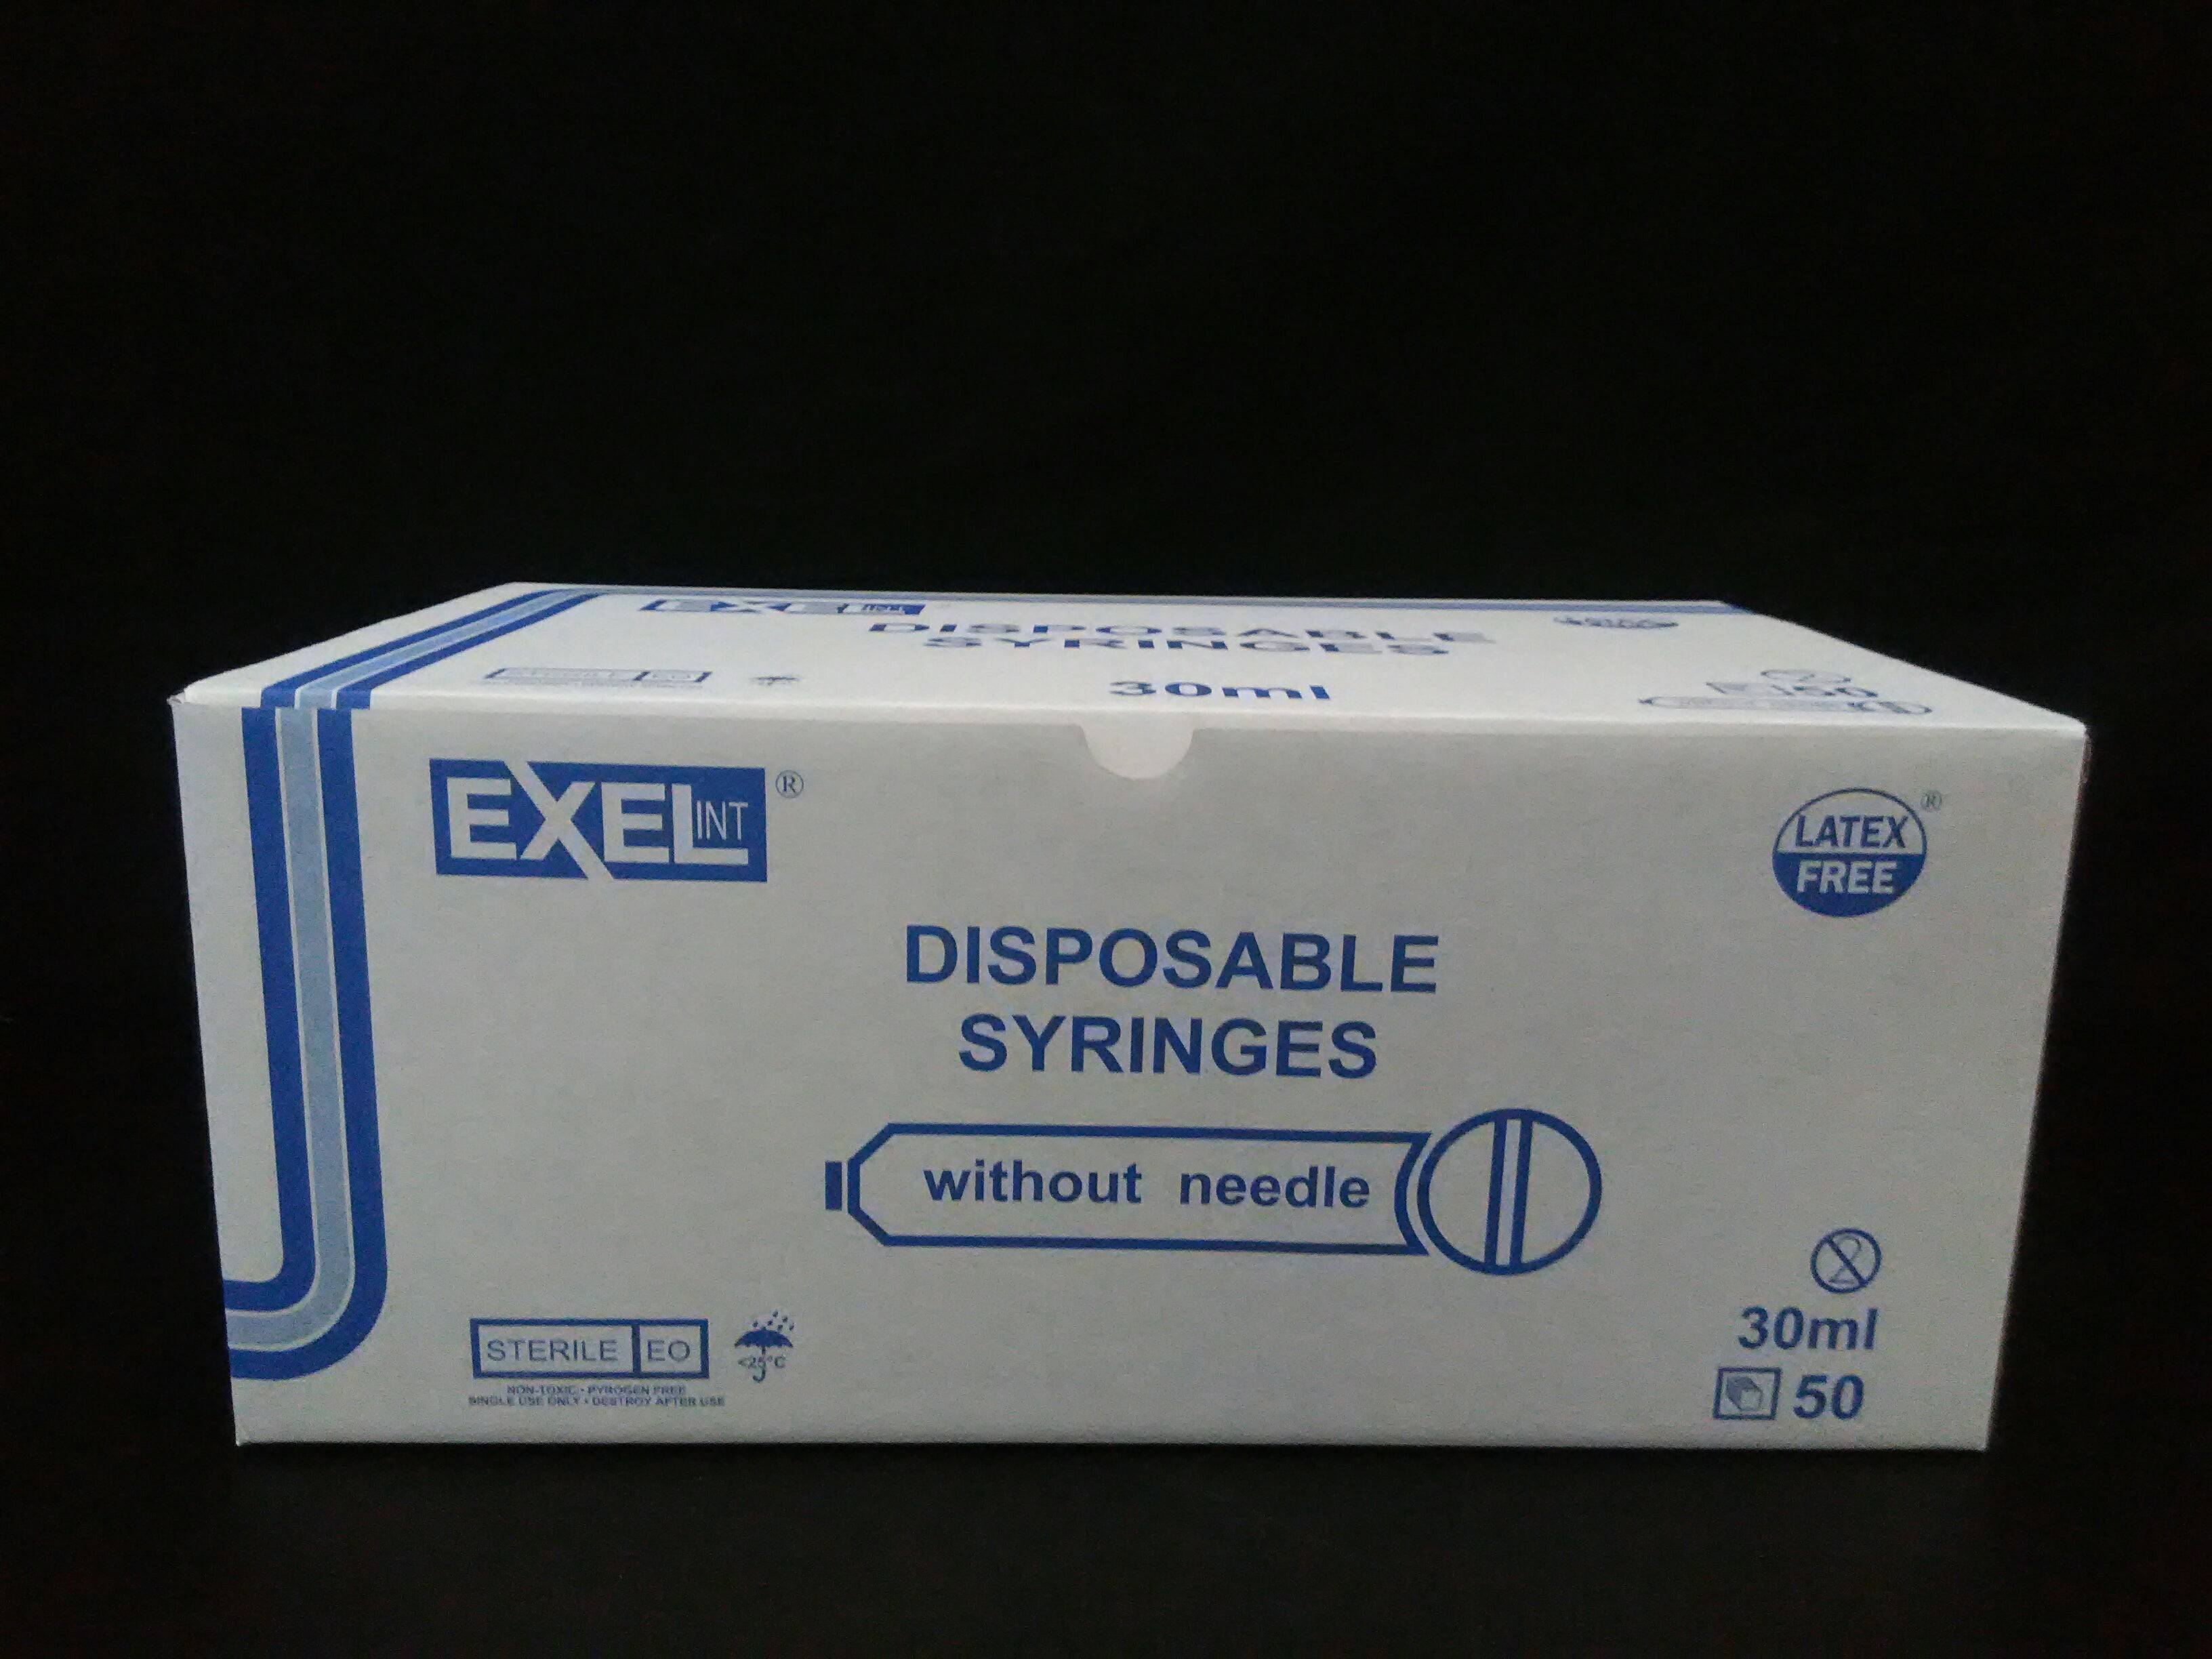 Exel 26290 Disposable Syringes with out Needle 30ml (50/box)